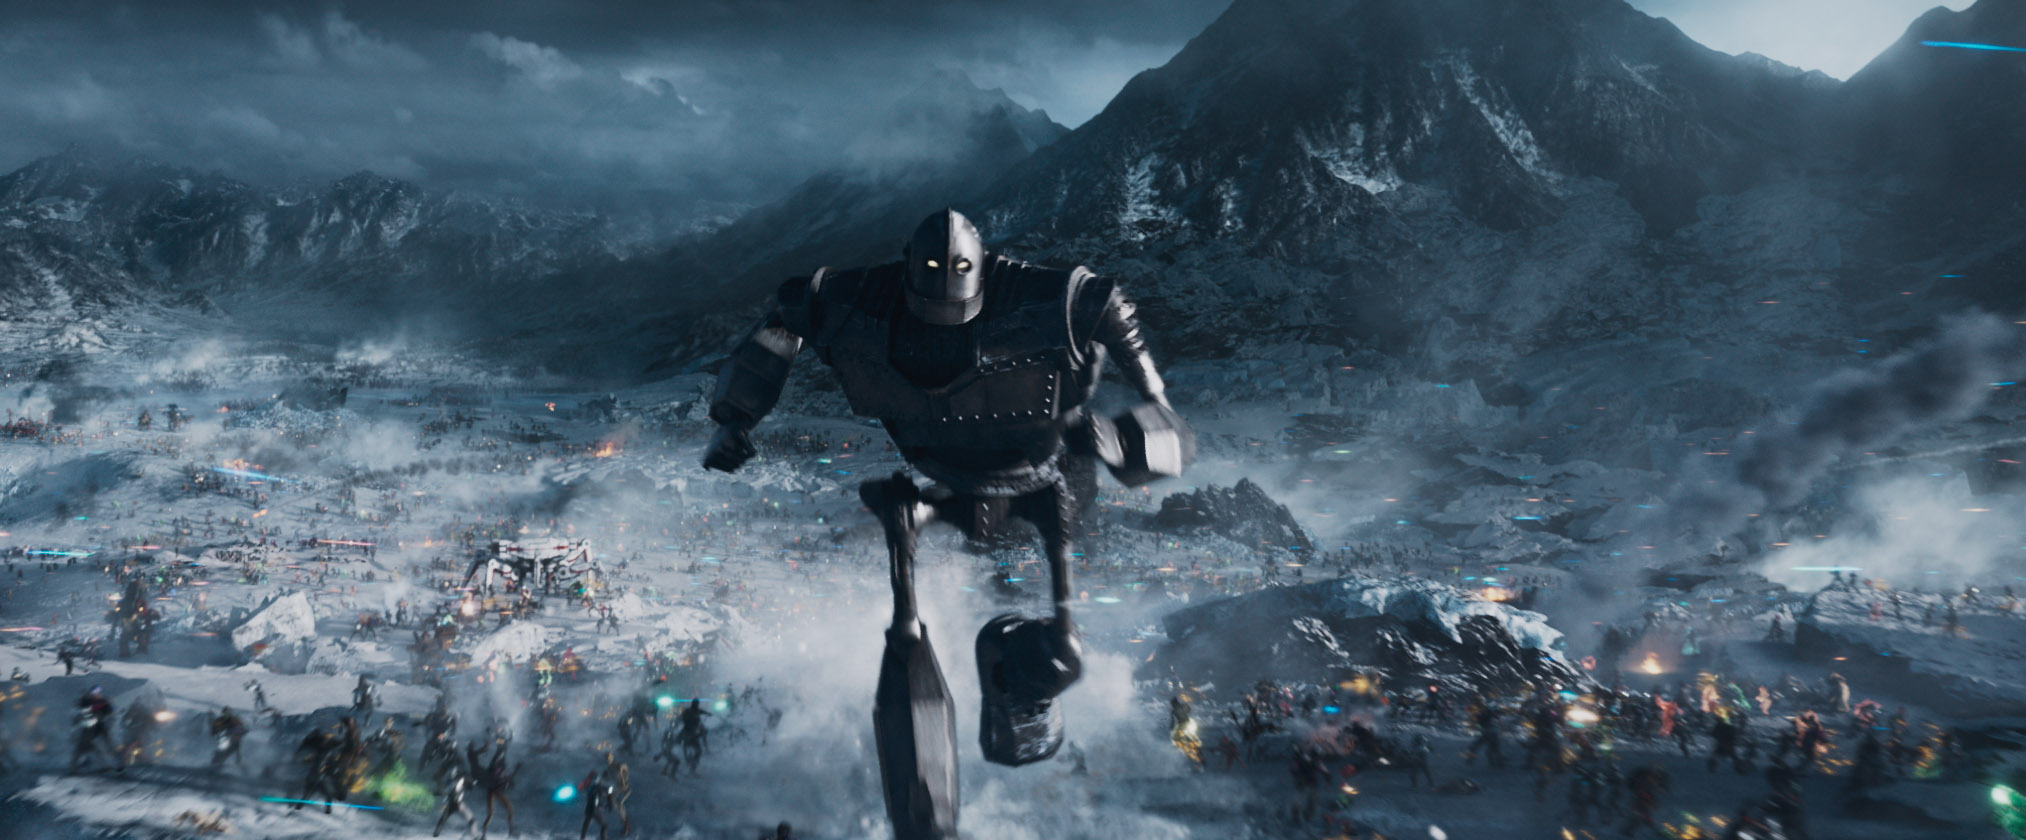 Ready Player One Character Posters Reveal the Avatars